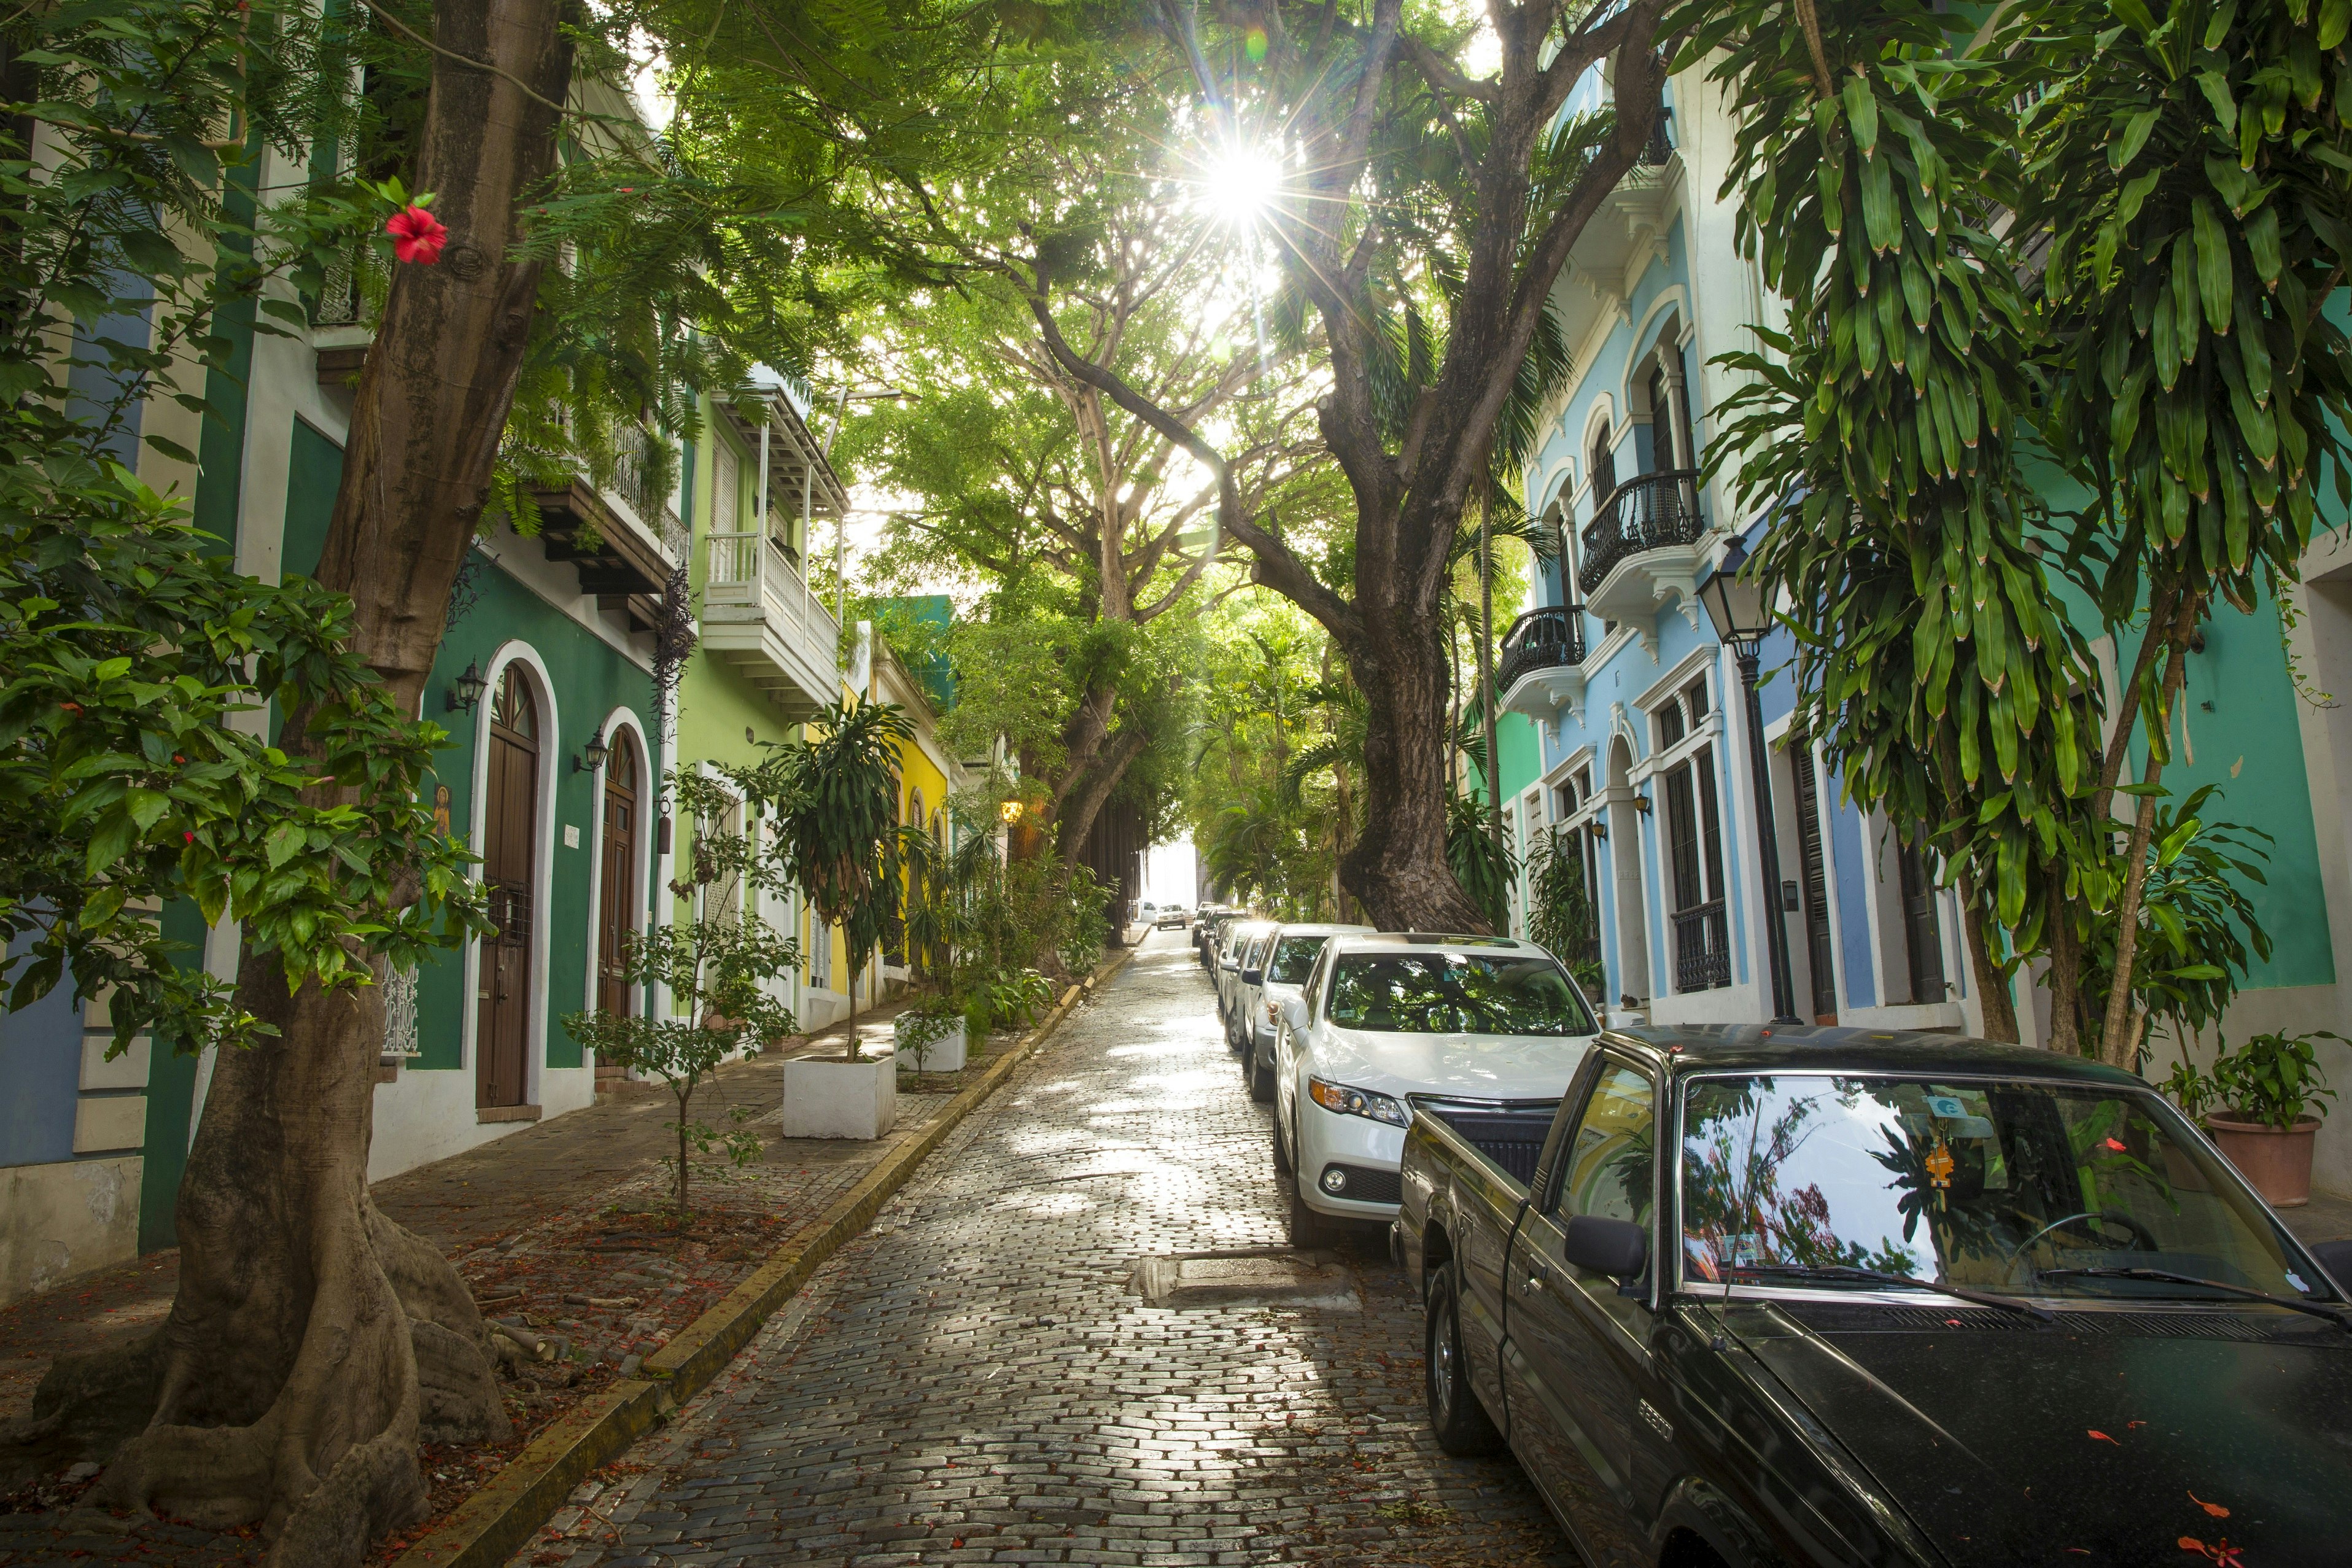 A narrow old street in San Juan with colourfully painted houses running along either side. The road is shaded by large trees, making the scene appear very serene.